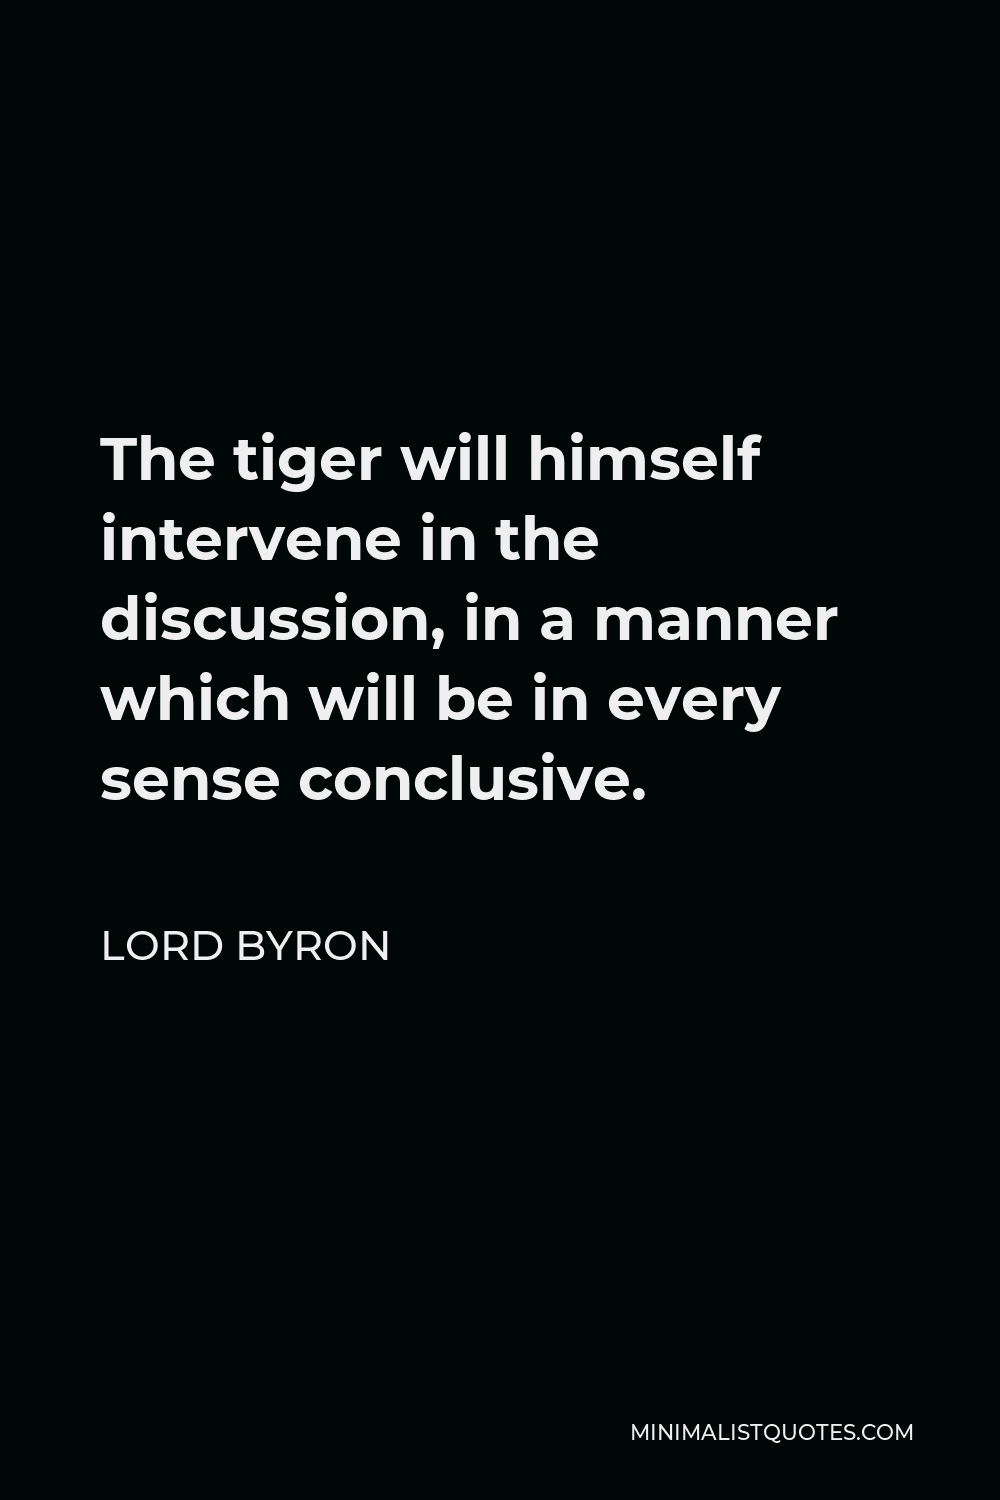 Lord Byron Quote - The tiger will himself intervene in the discussion, in a manner which will be in every sense conclusive.